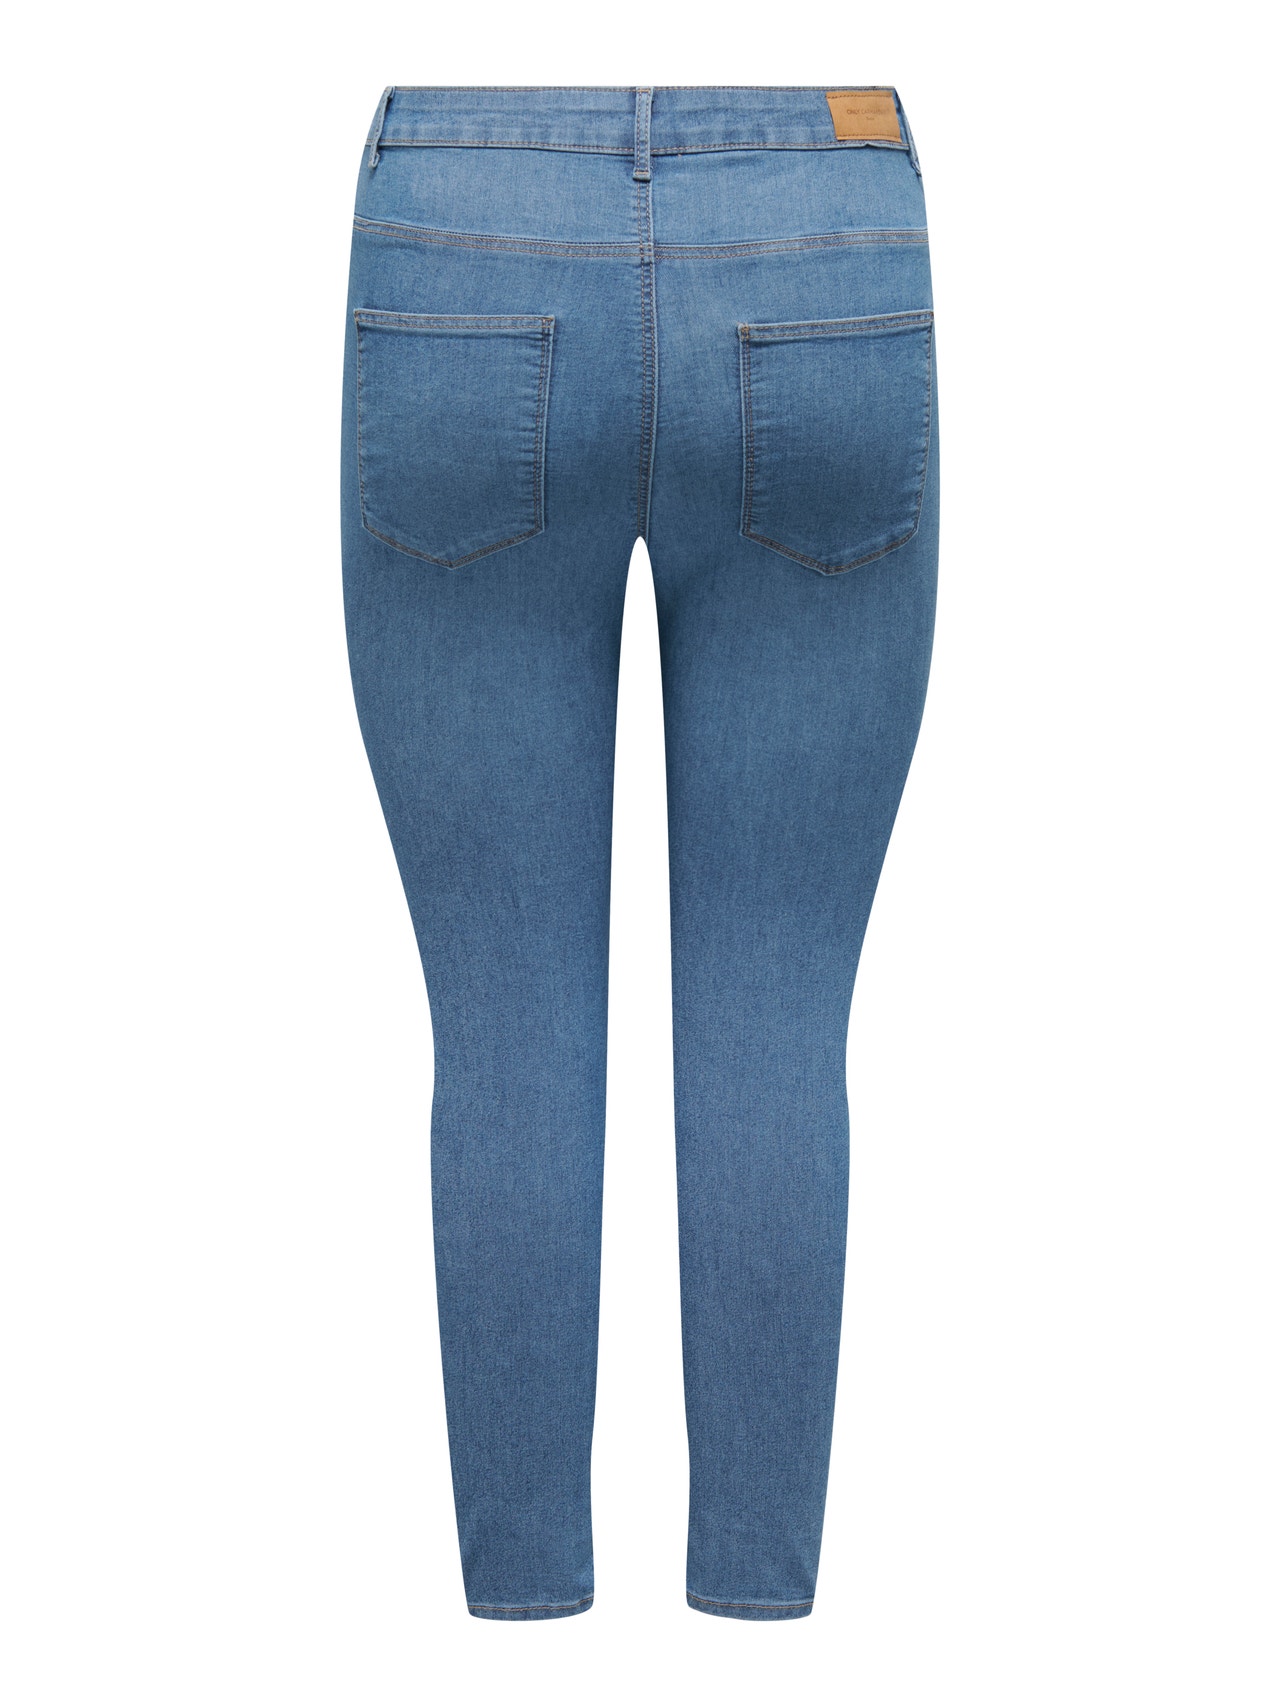 ONLY Skinny Fit Hohe Taille Jeans -Light Blue Denim - 15277231